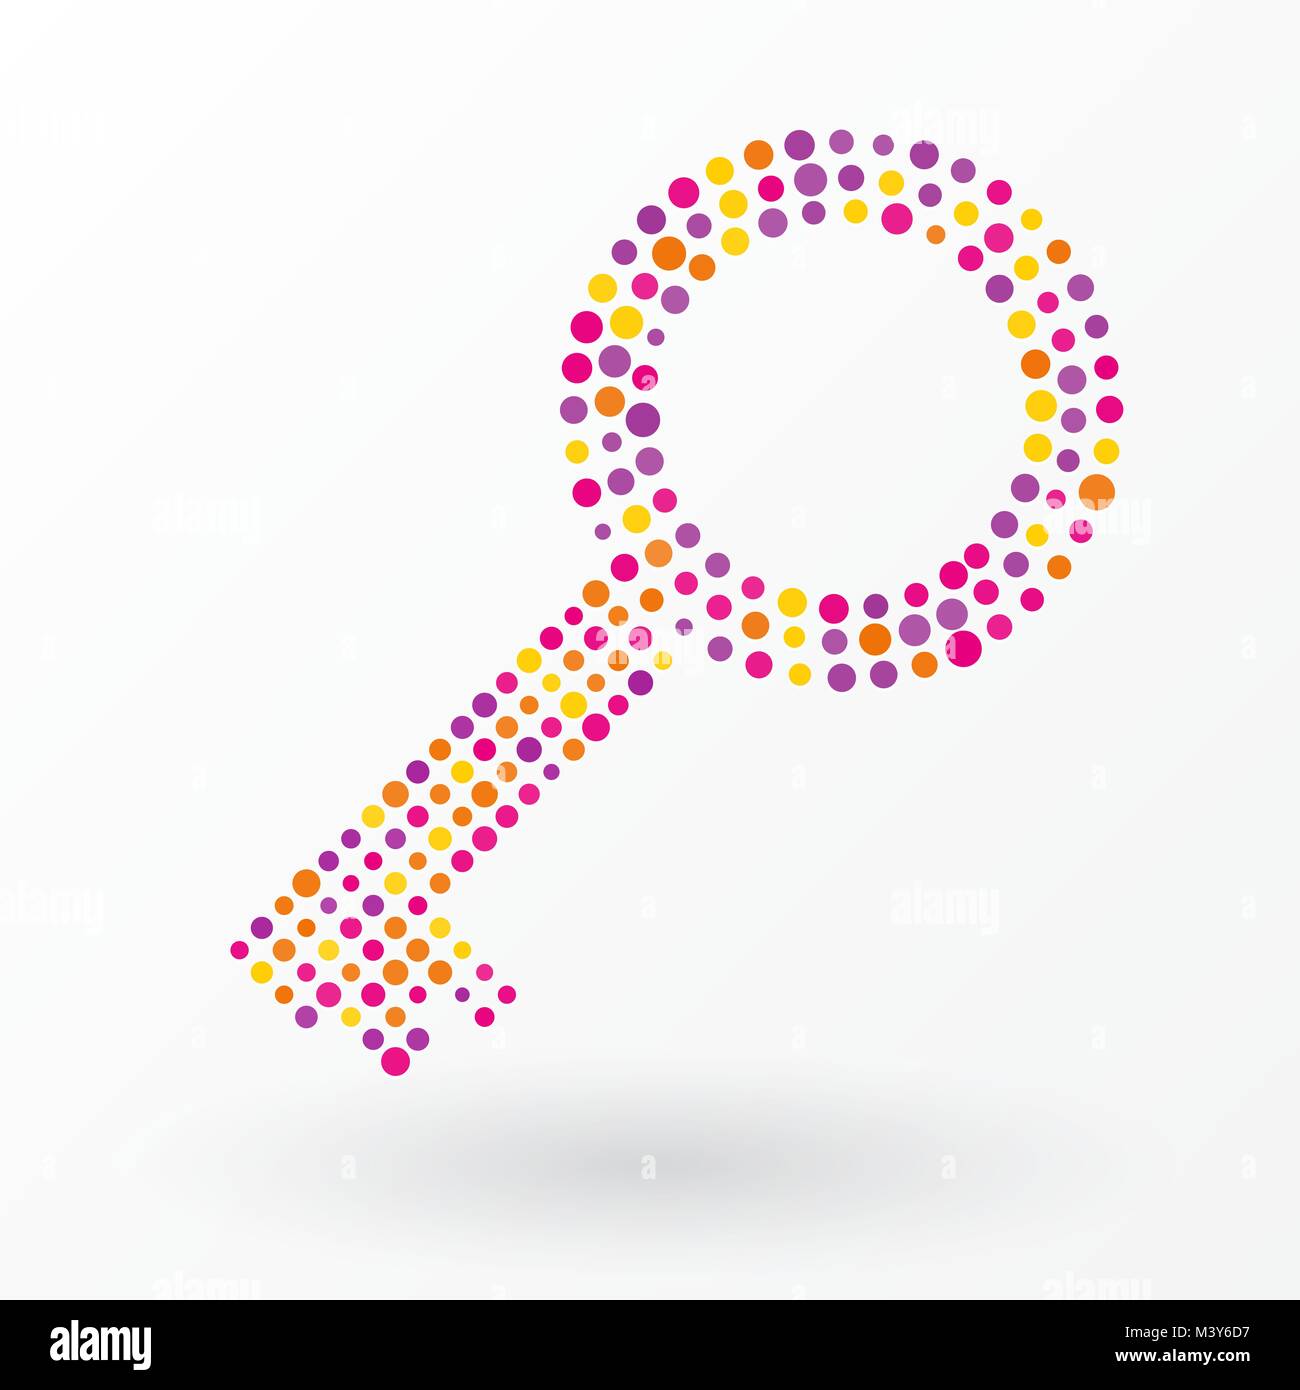 Key composed of colored dots Stock Vector